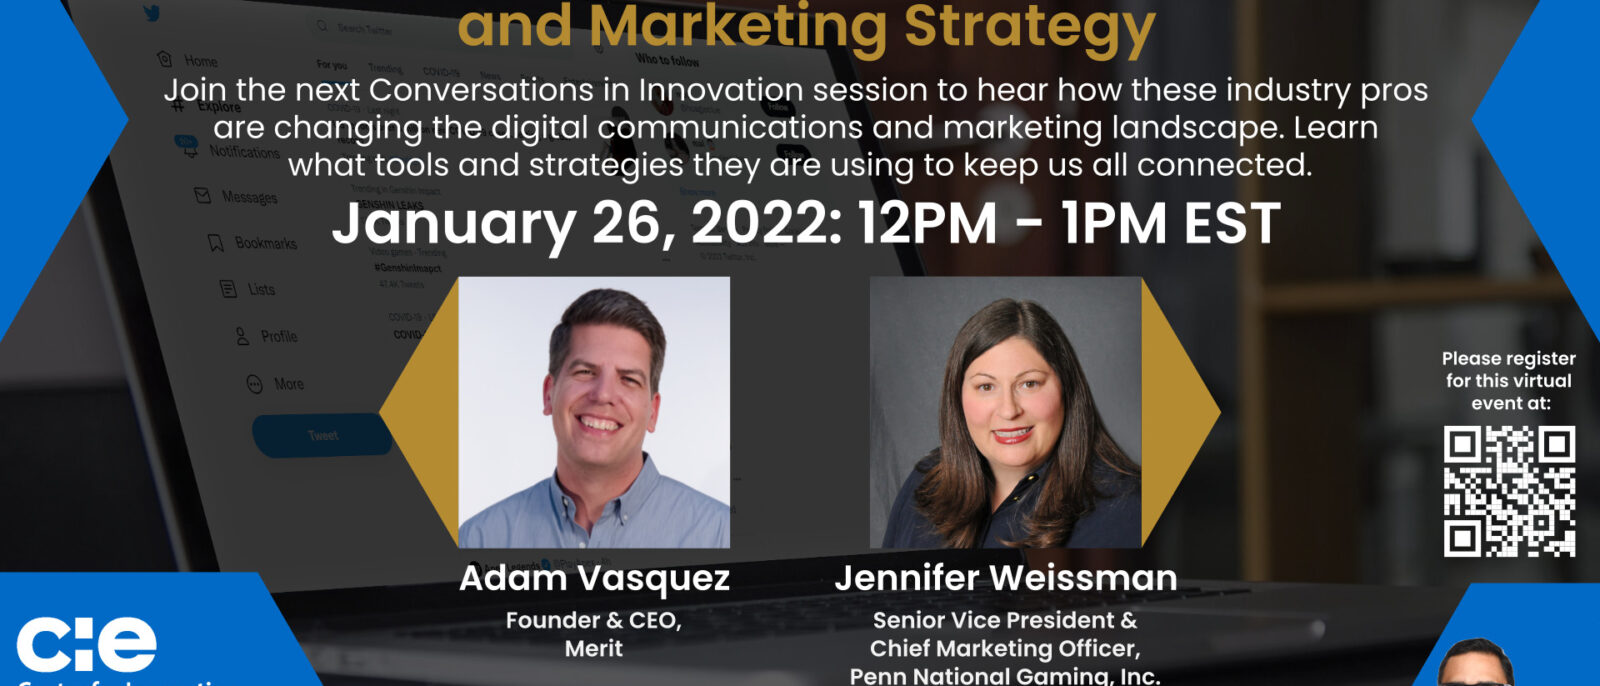 Digital Communications and Marketing Experts to Speak at CIE Event